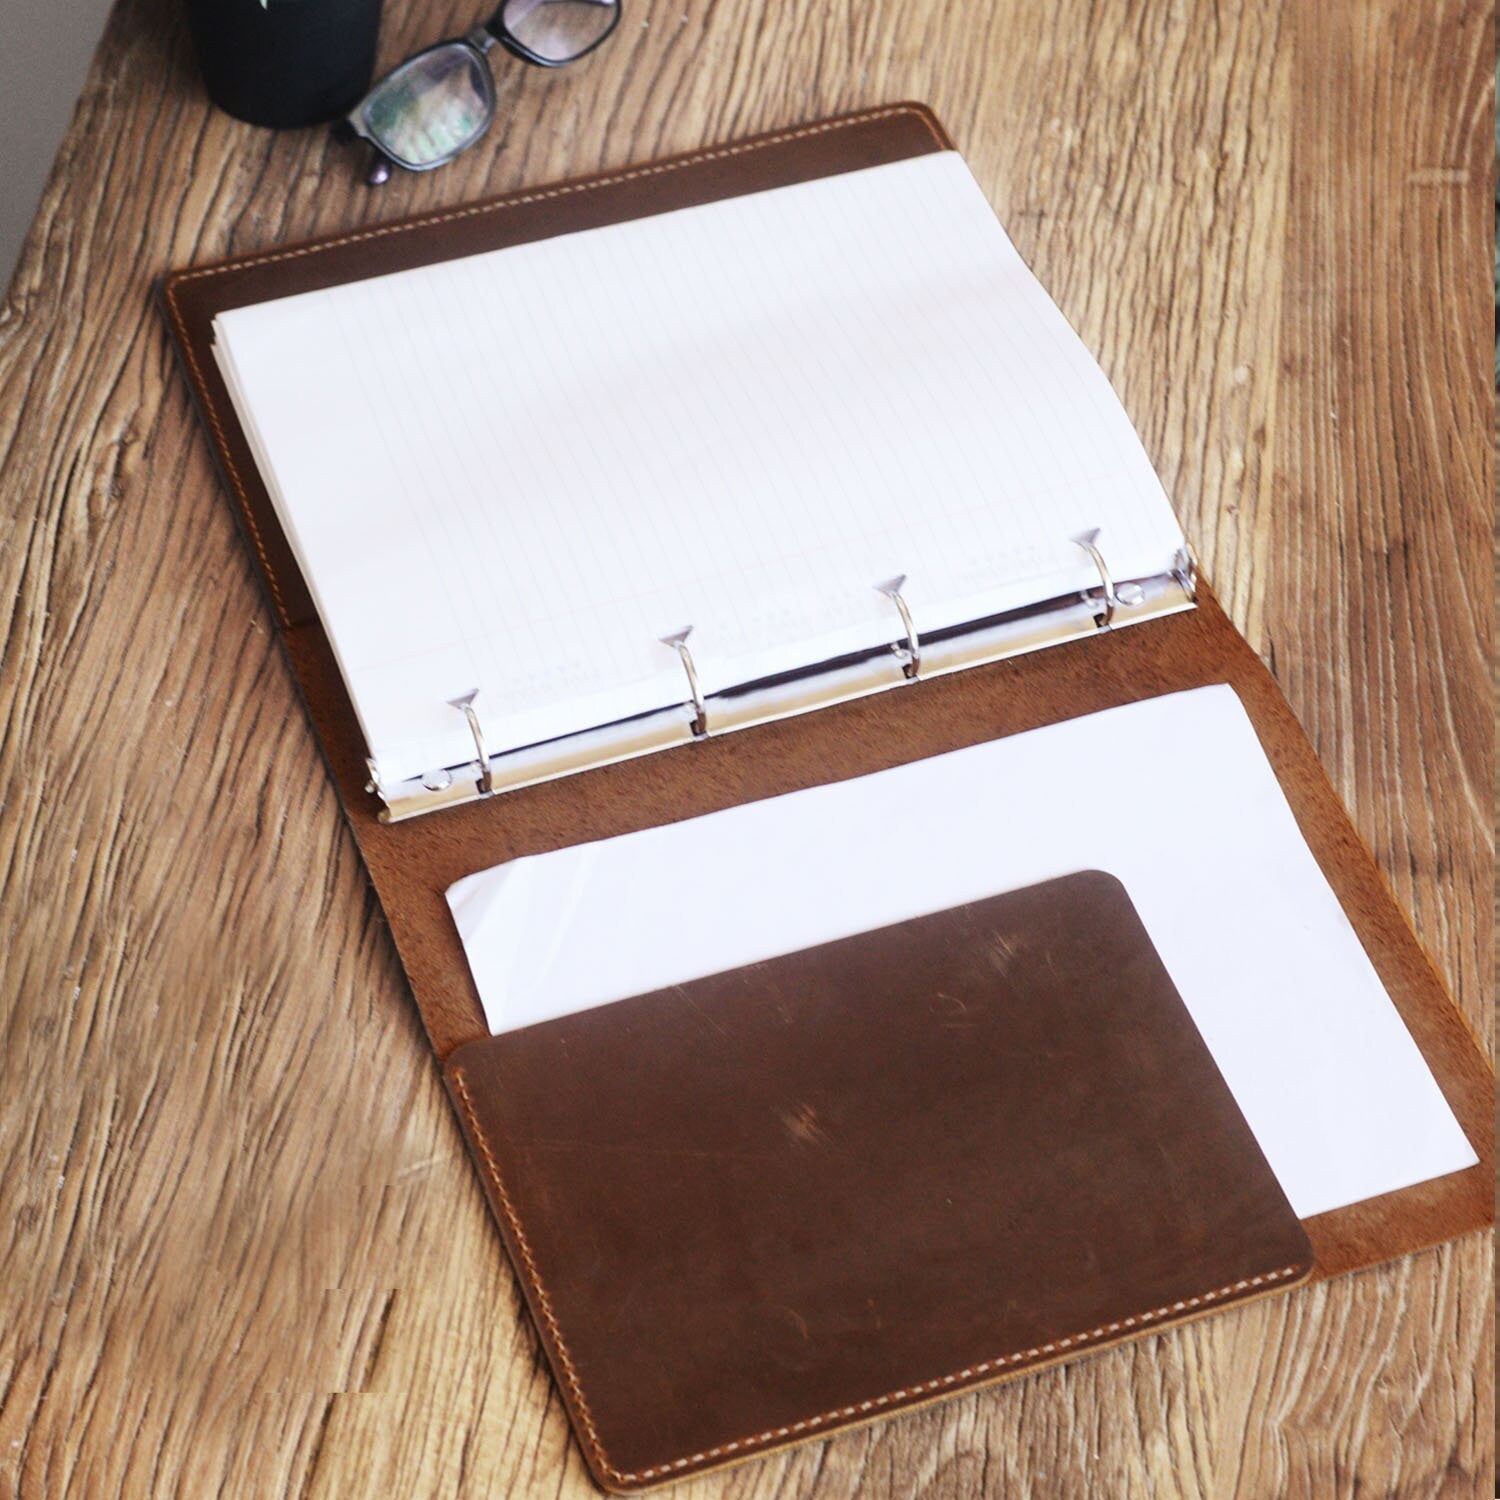 Leather Binder 4-Ring, fit 4 hole A4 refill paper, Leather